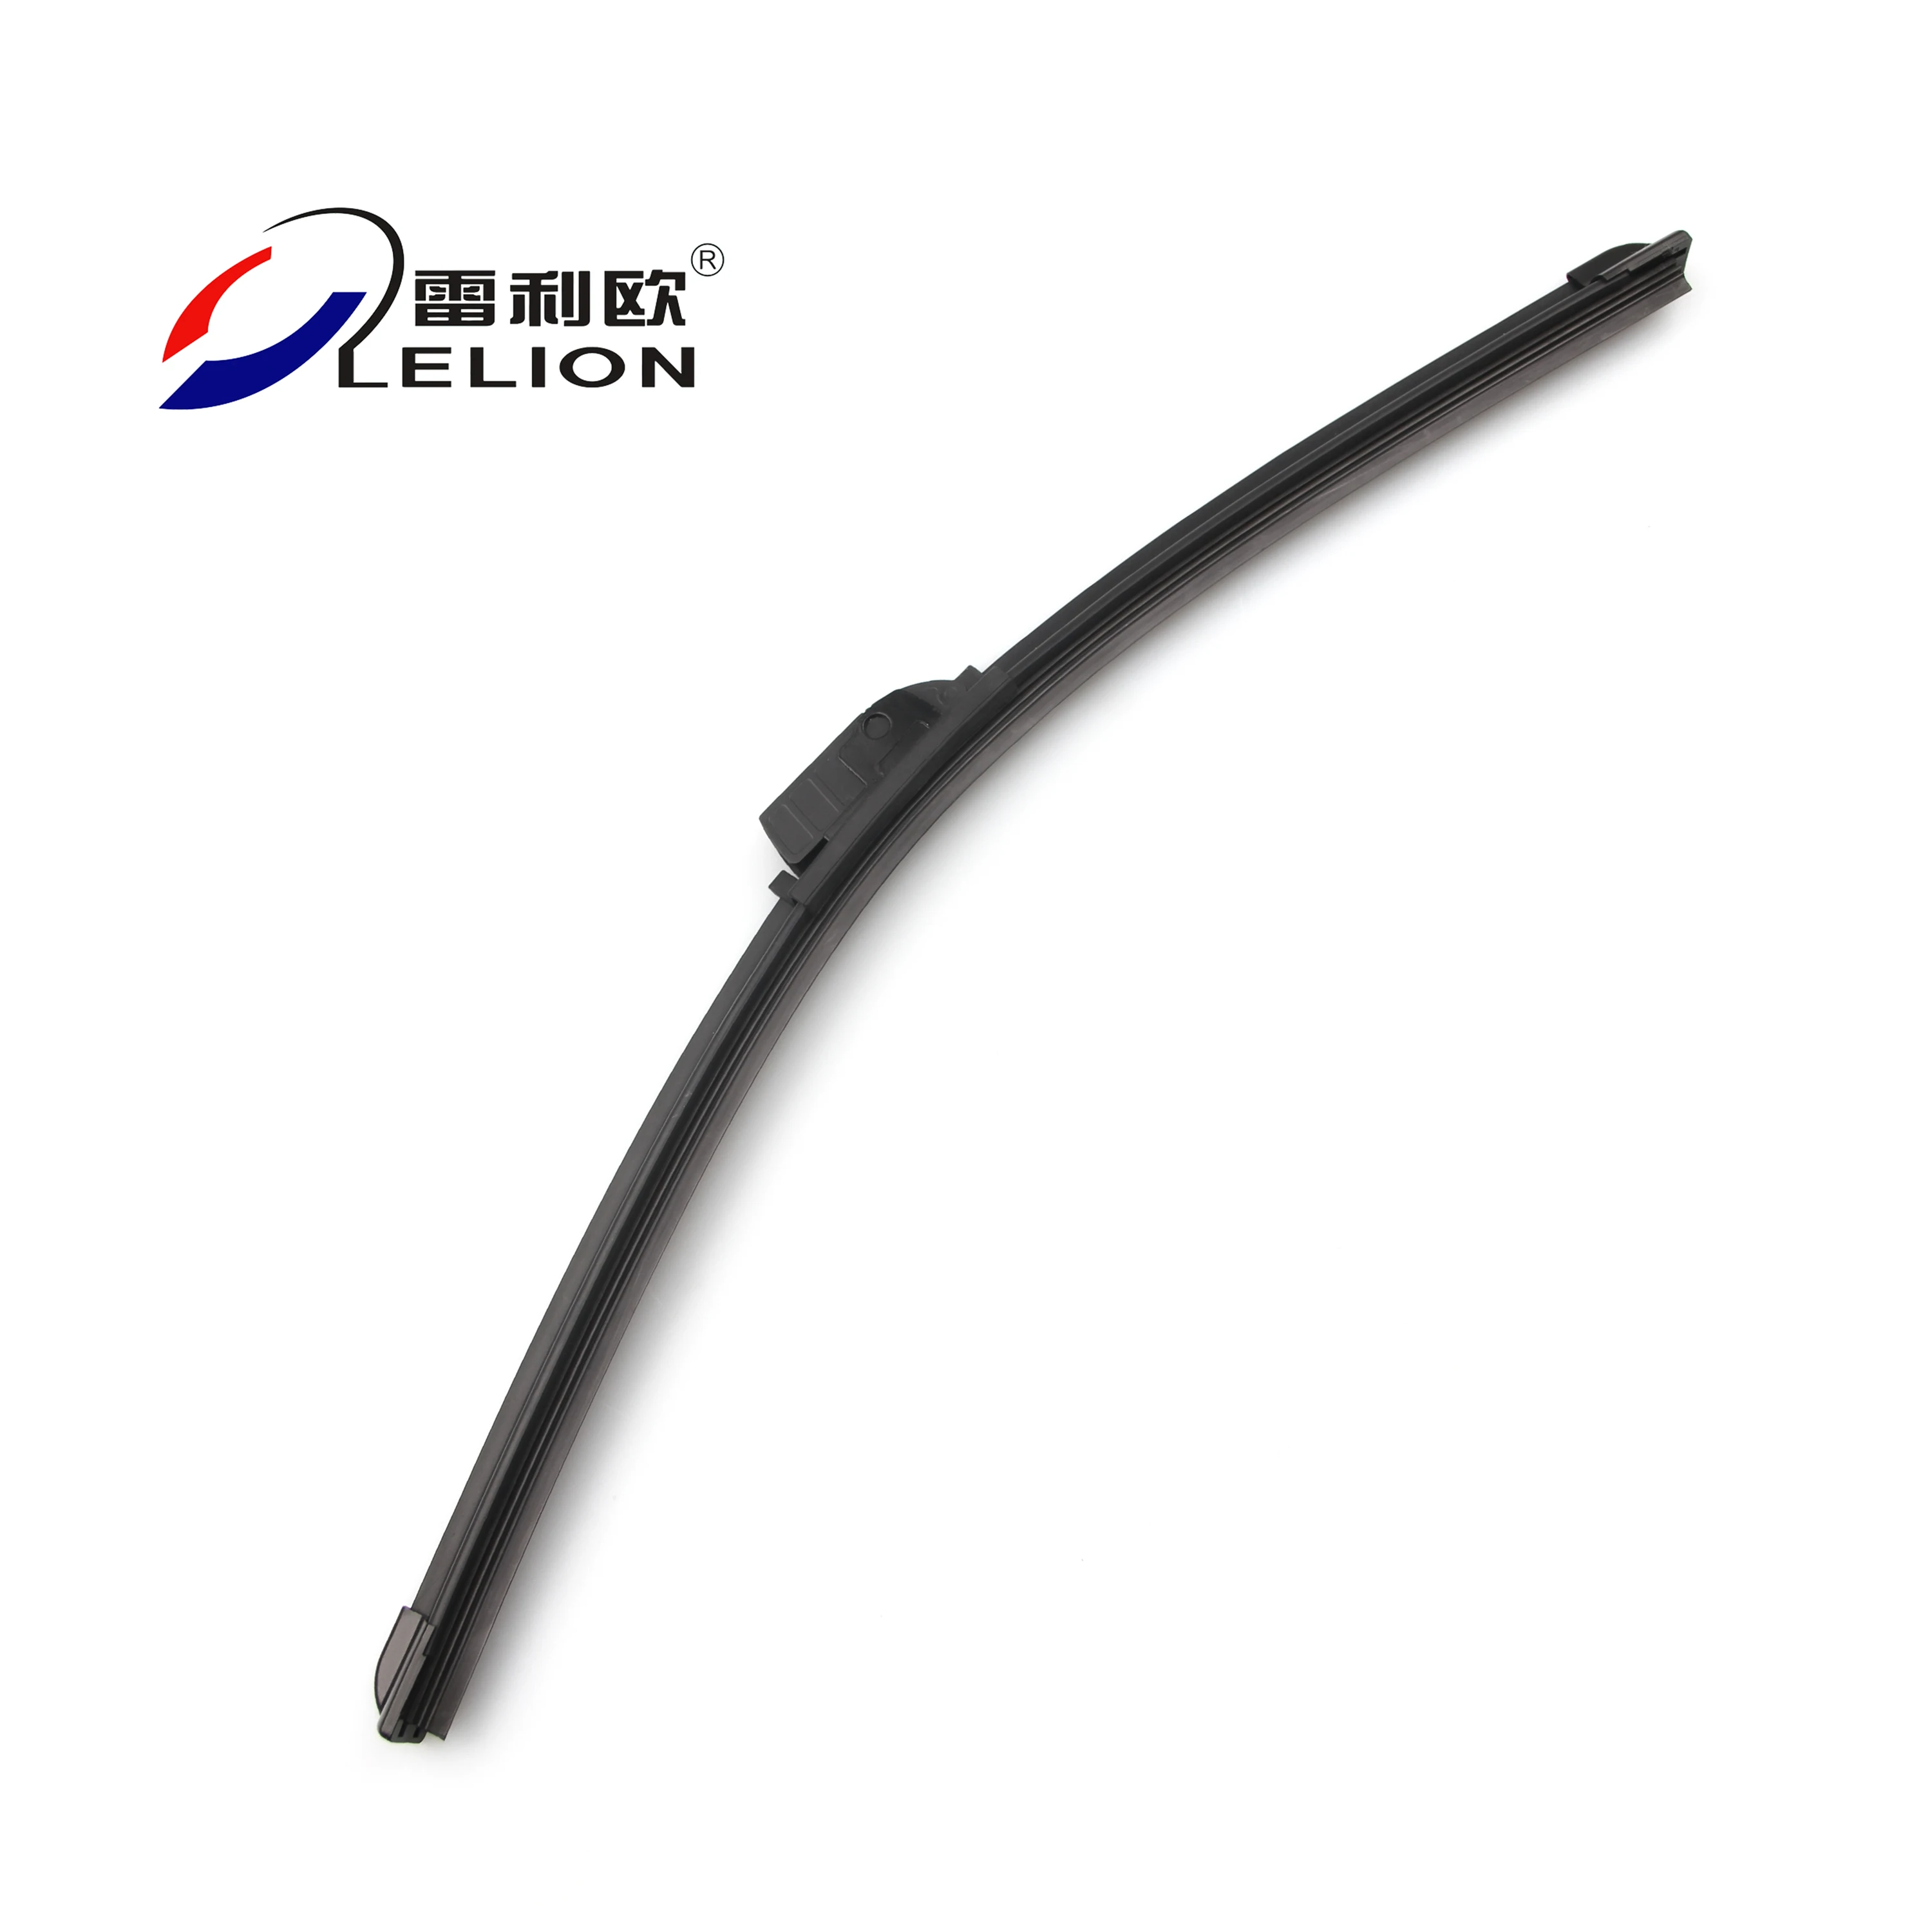 LELION High Quality Windshield Clear Natural Soft Wiper Blades Multi-function Replaceable 8 Adapter Windscreen Wiper Blade